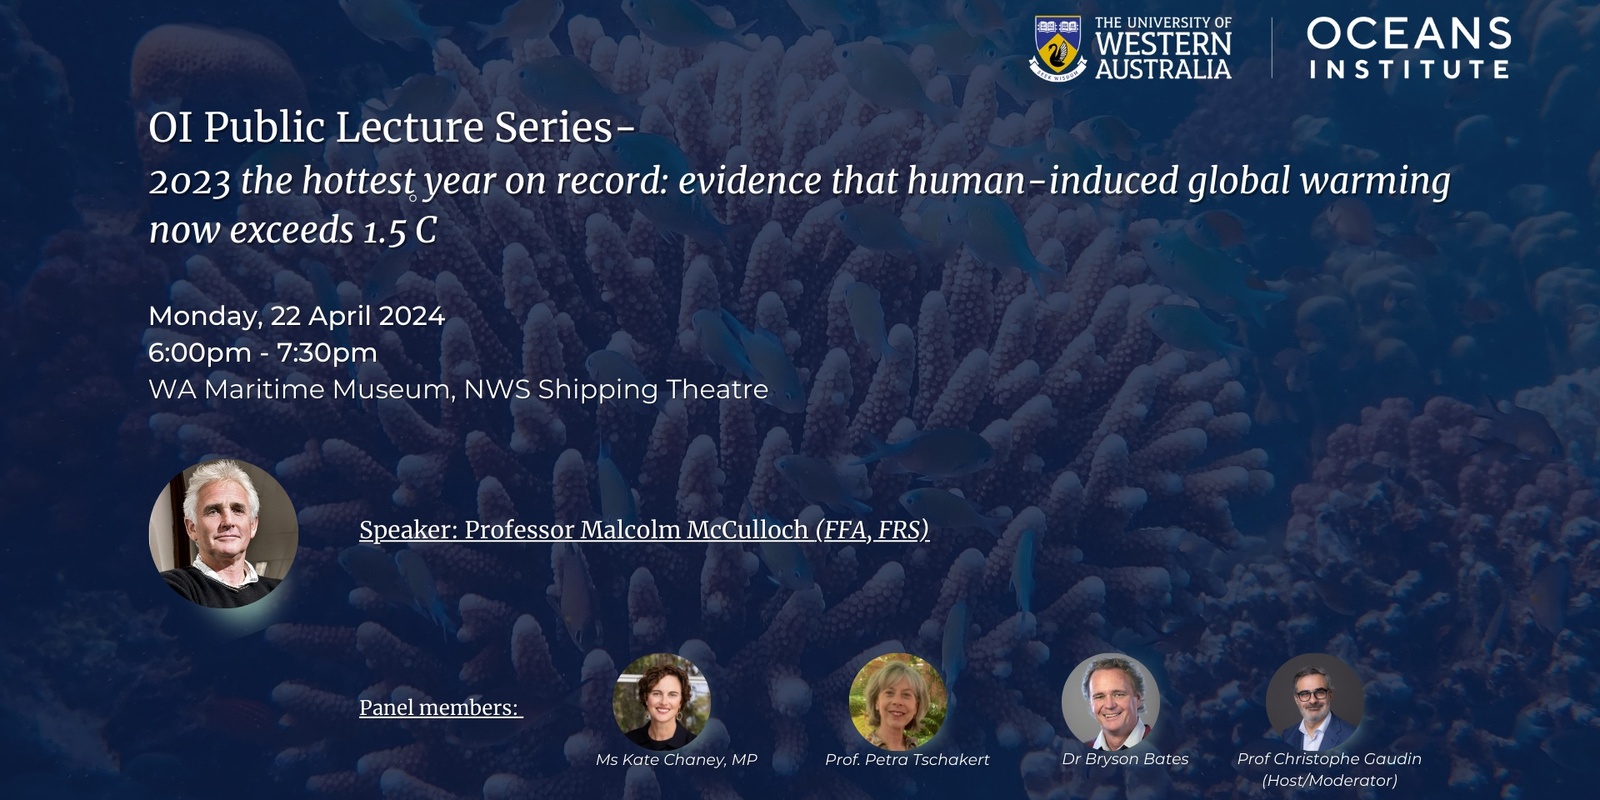 Banner image for OI Public Lecture Series- The hottest year on record: evidence that human-induced global warming now exceeds 1.5 C 